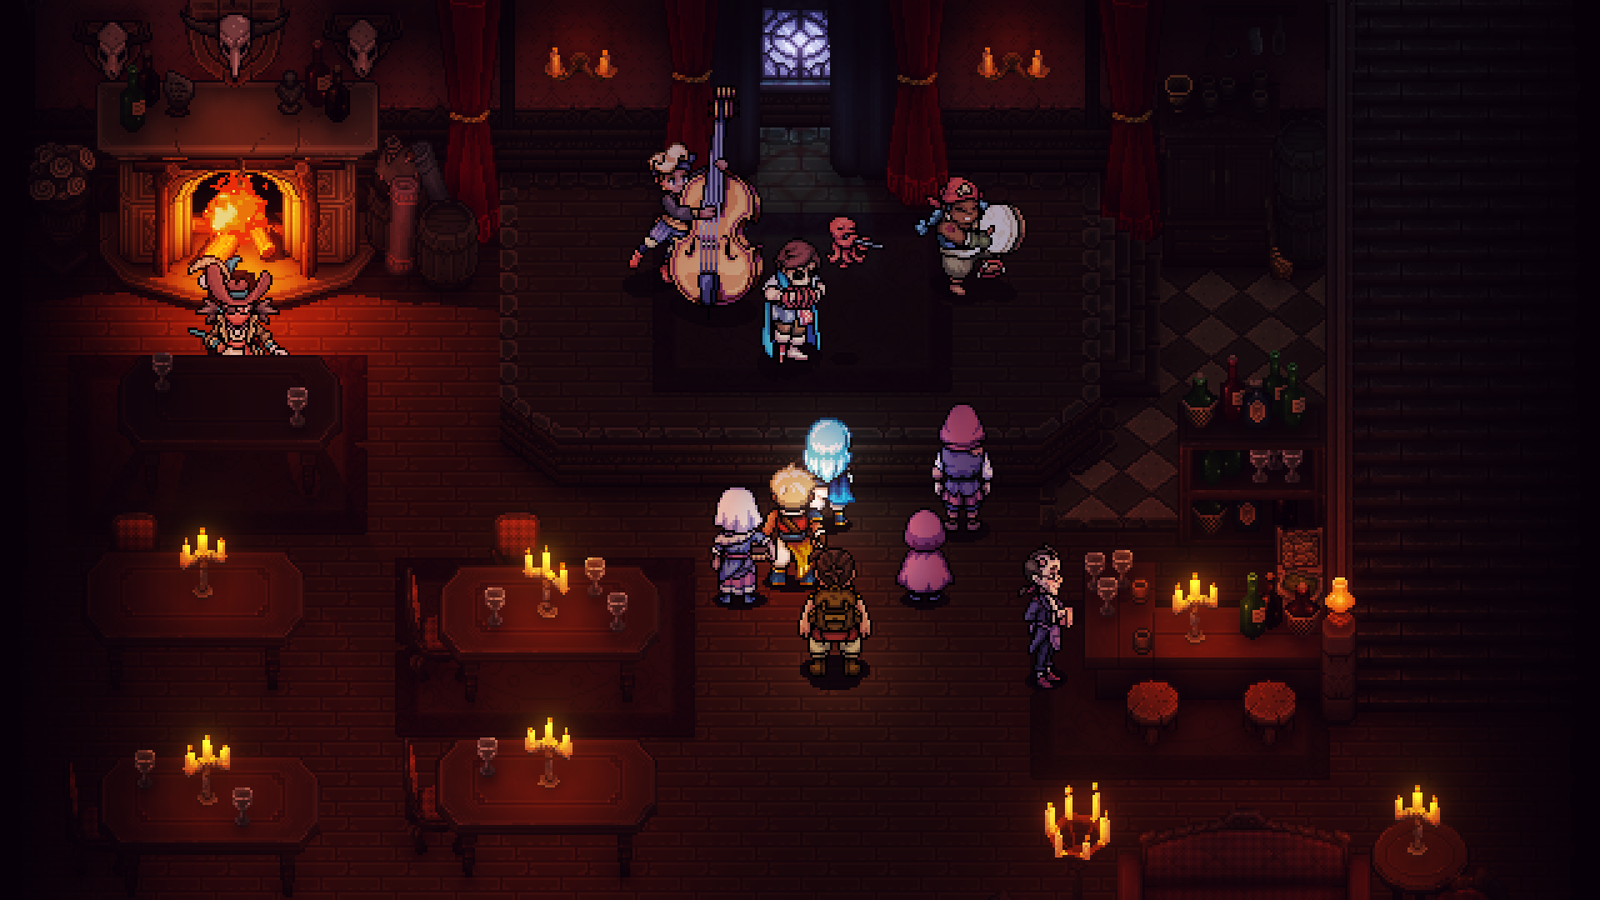 Sea of Stars gameplay, showing the main party in an Inn